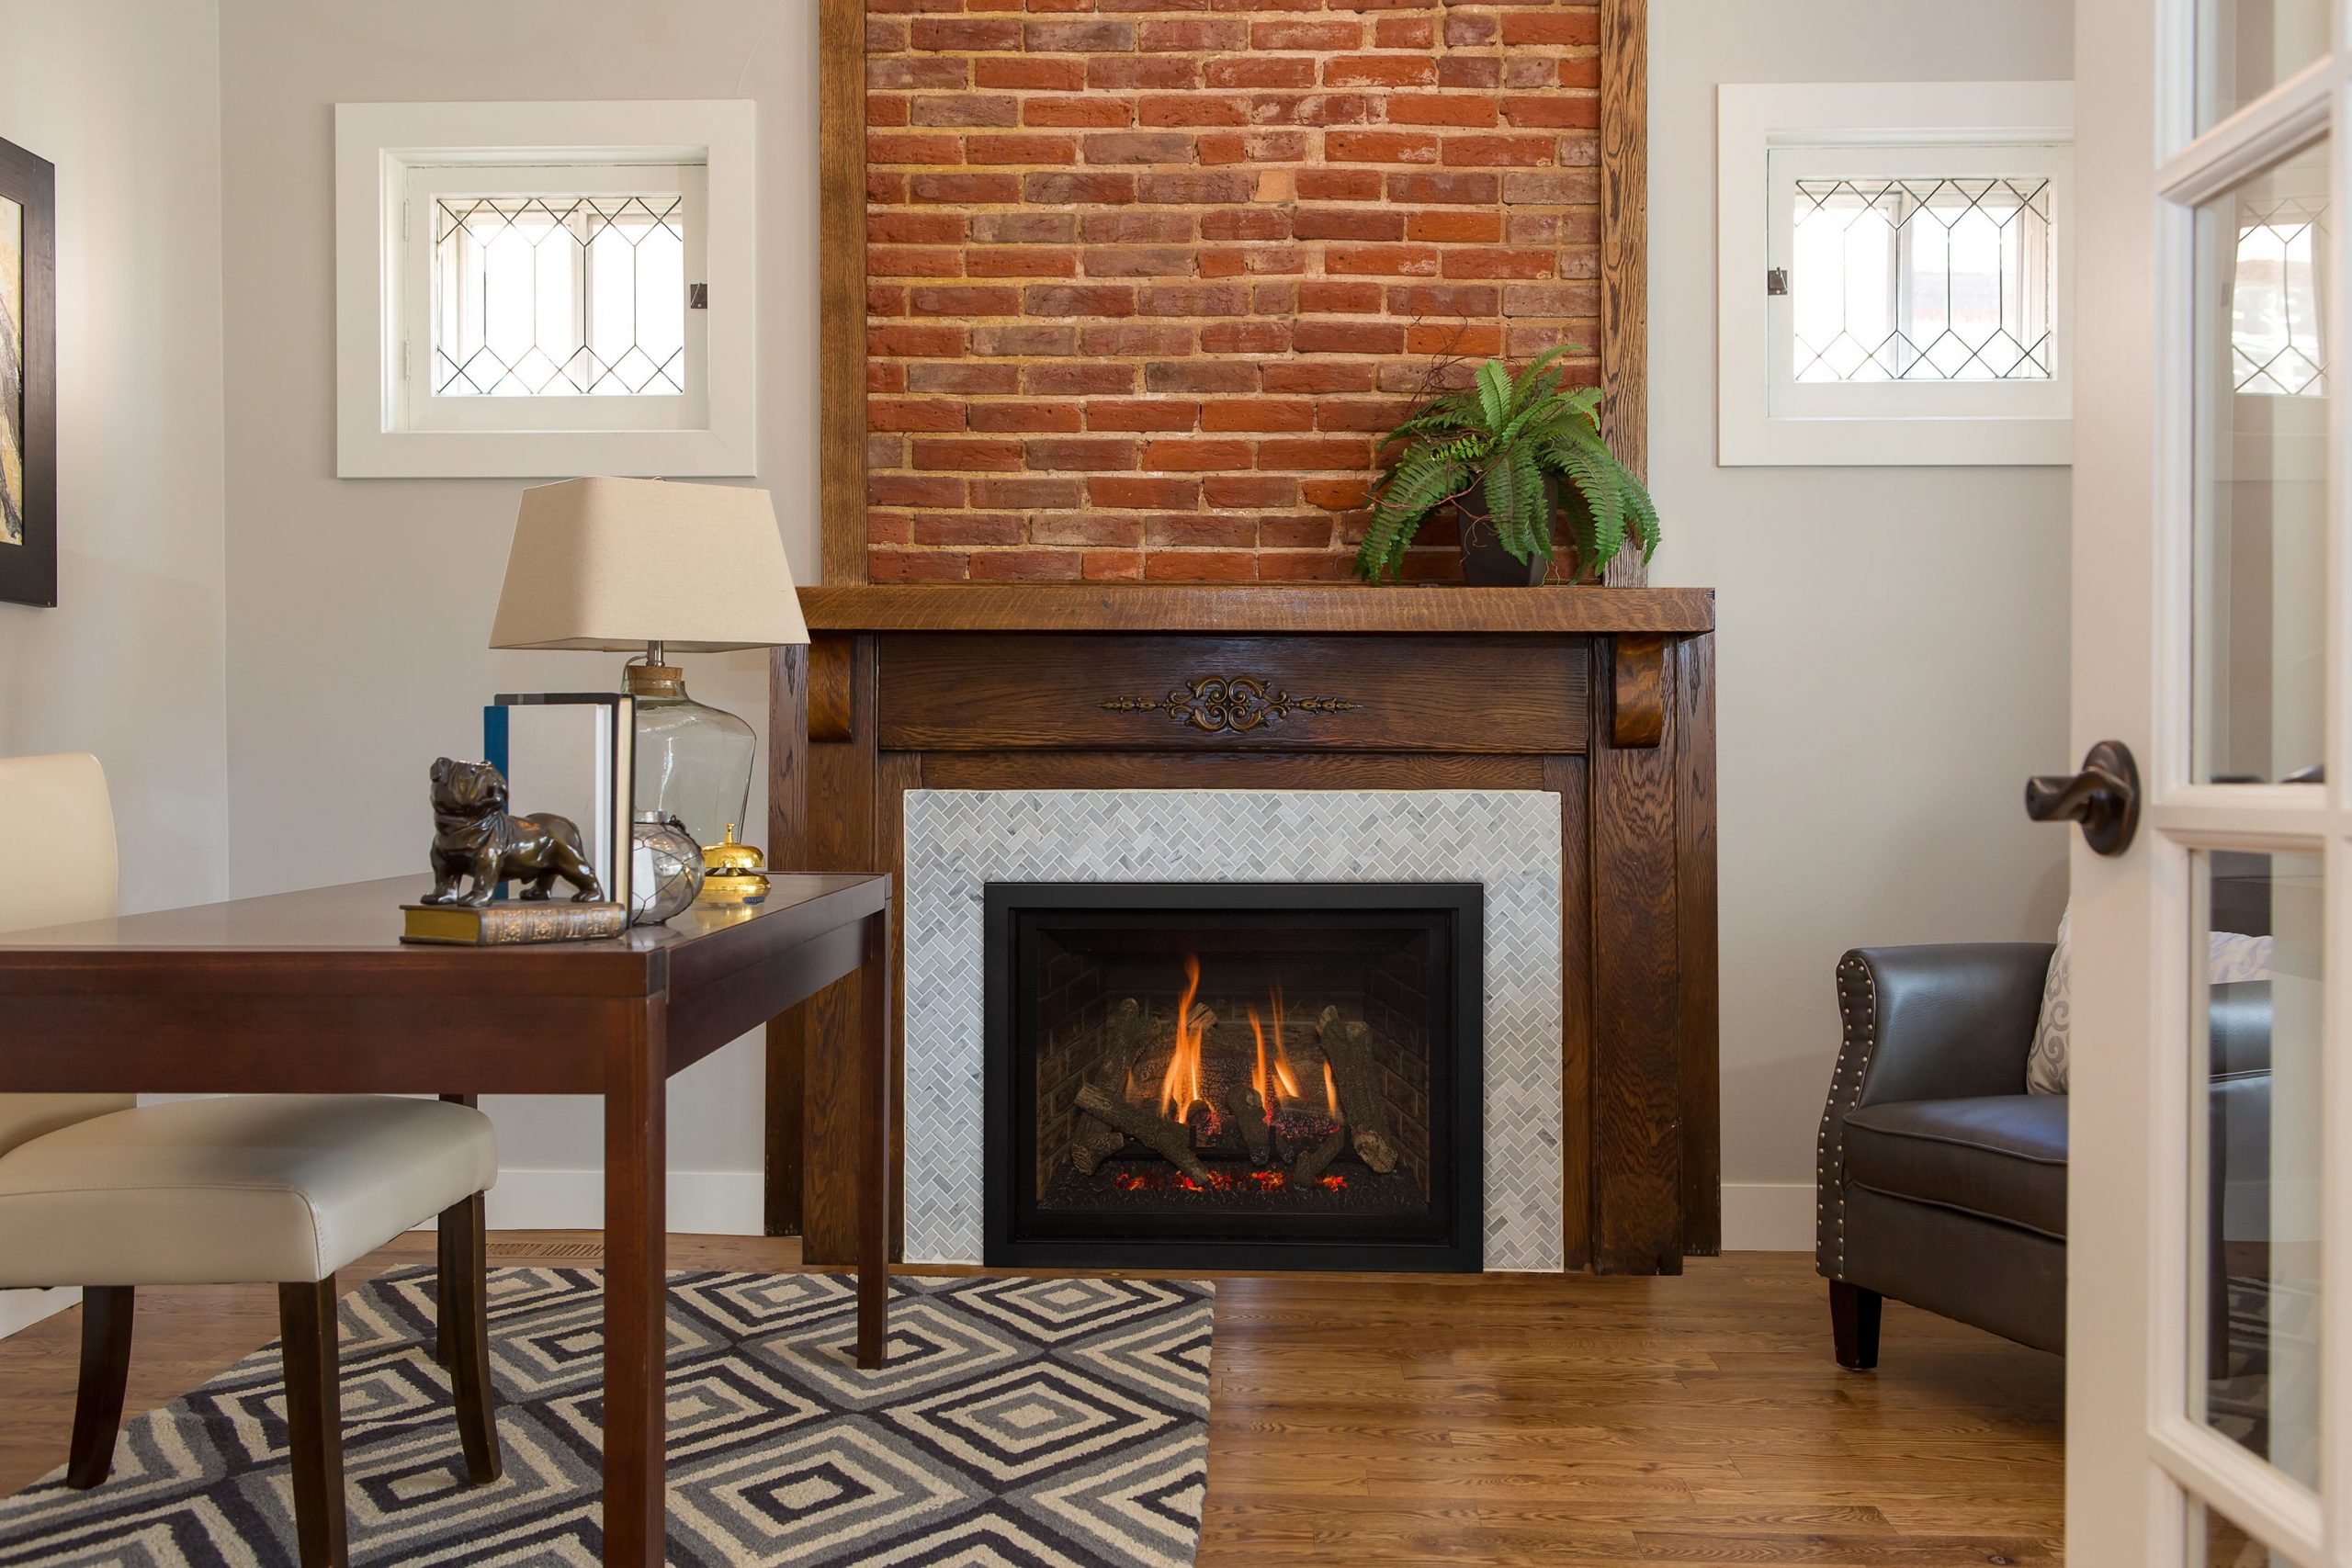 Which Rooms Can I Install My Fireplace in My House?